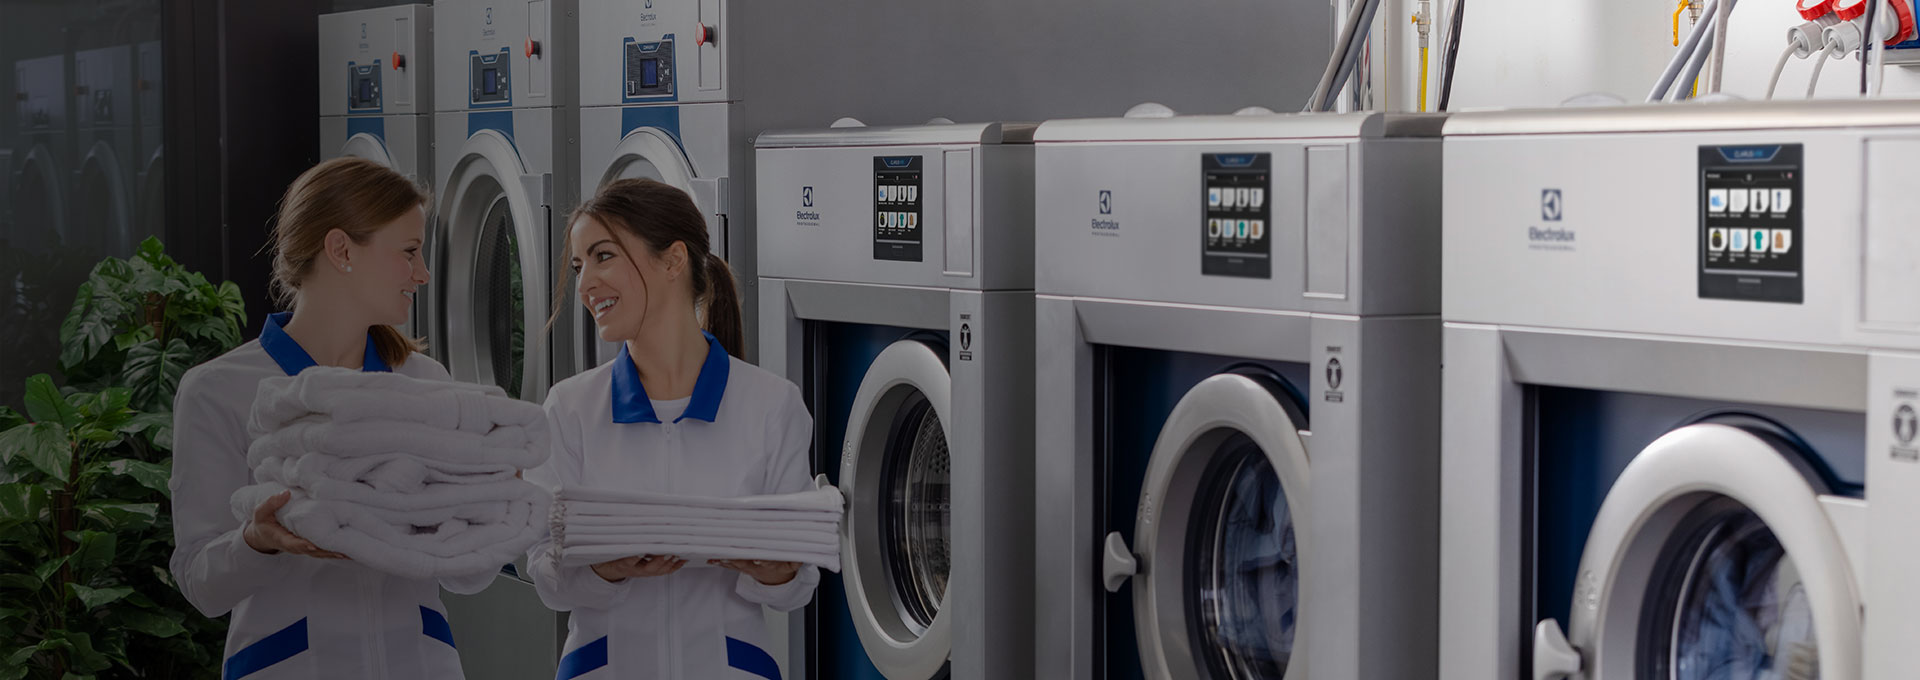 washers-and-dryers-1920x680